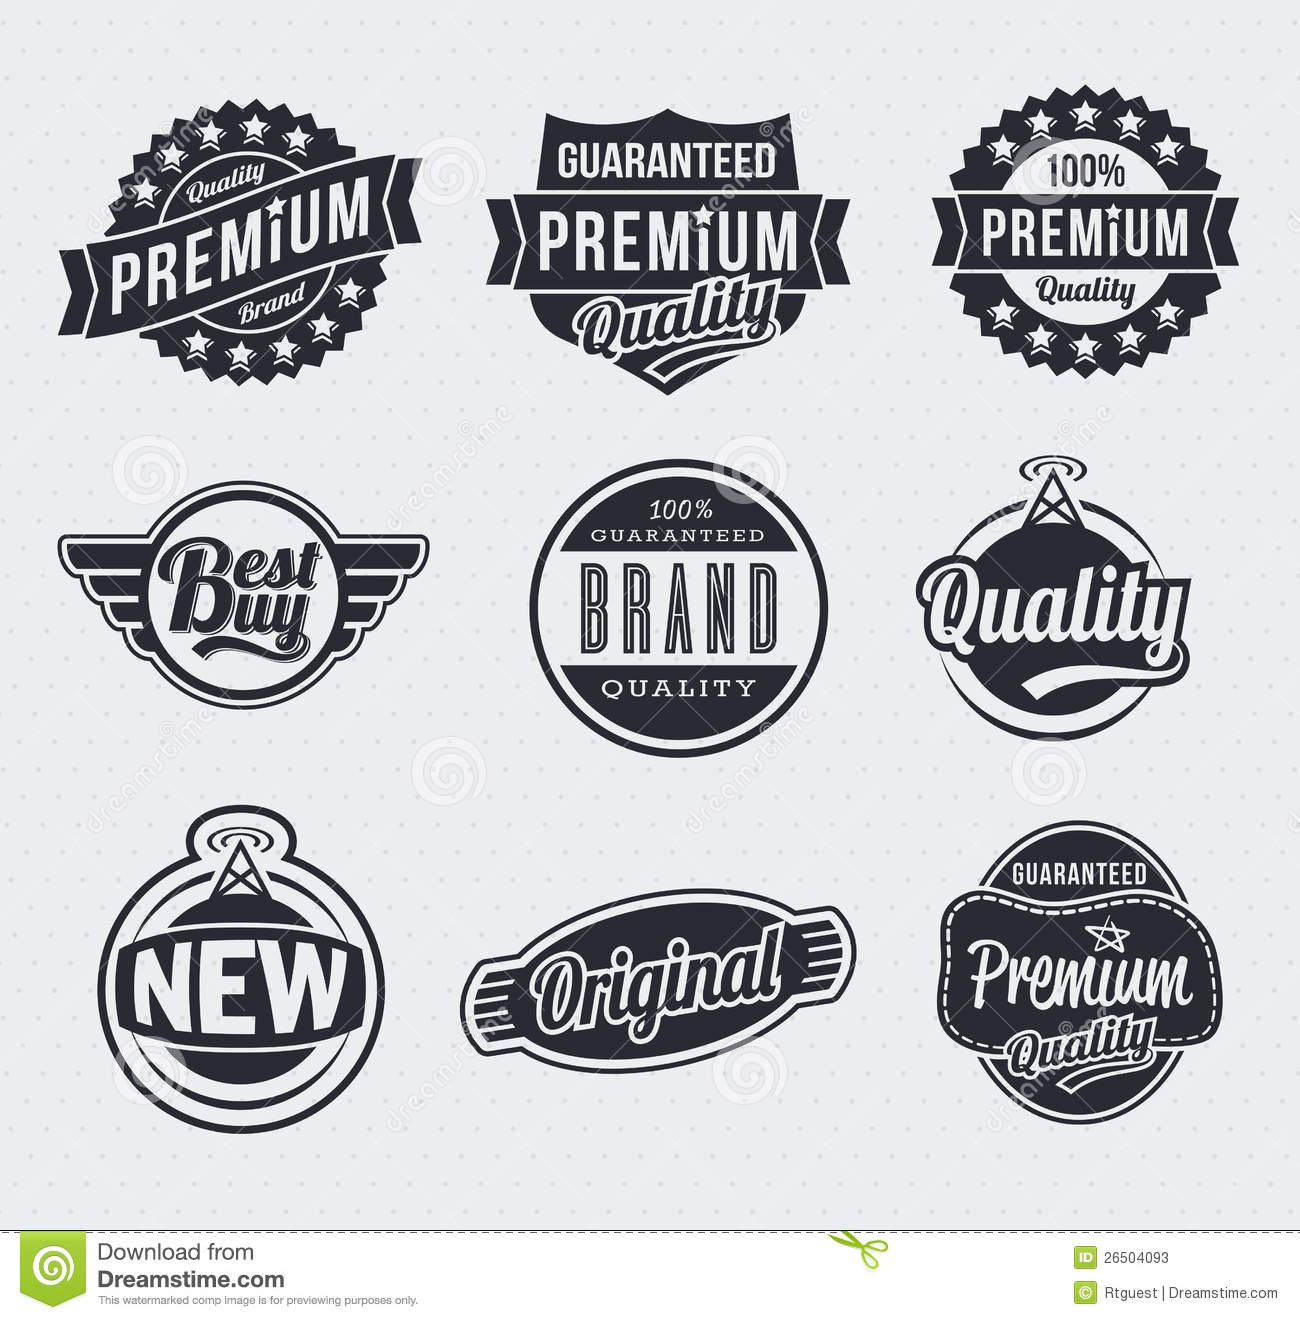 Vintage logo clipart 20 free Cliparts | Download images on ...